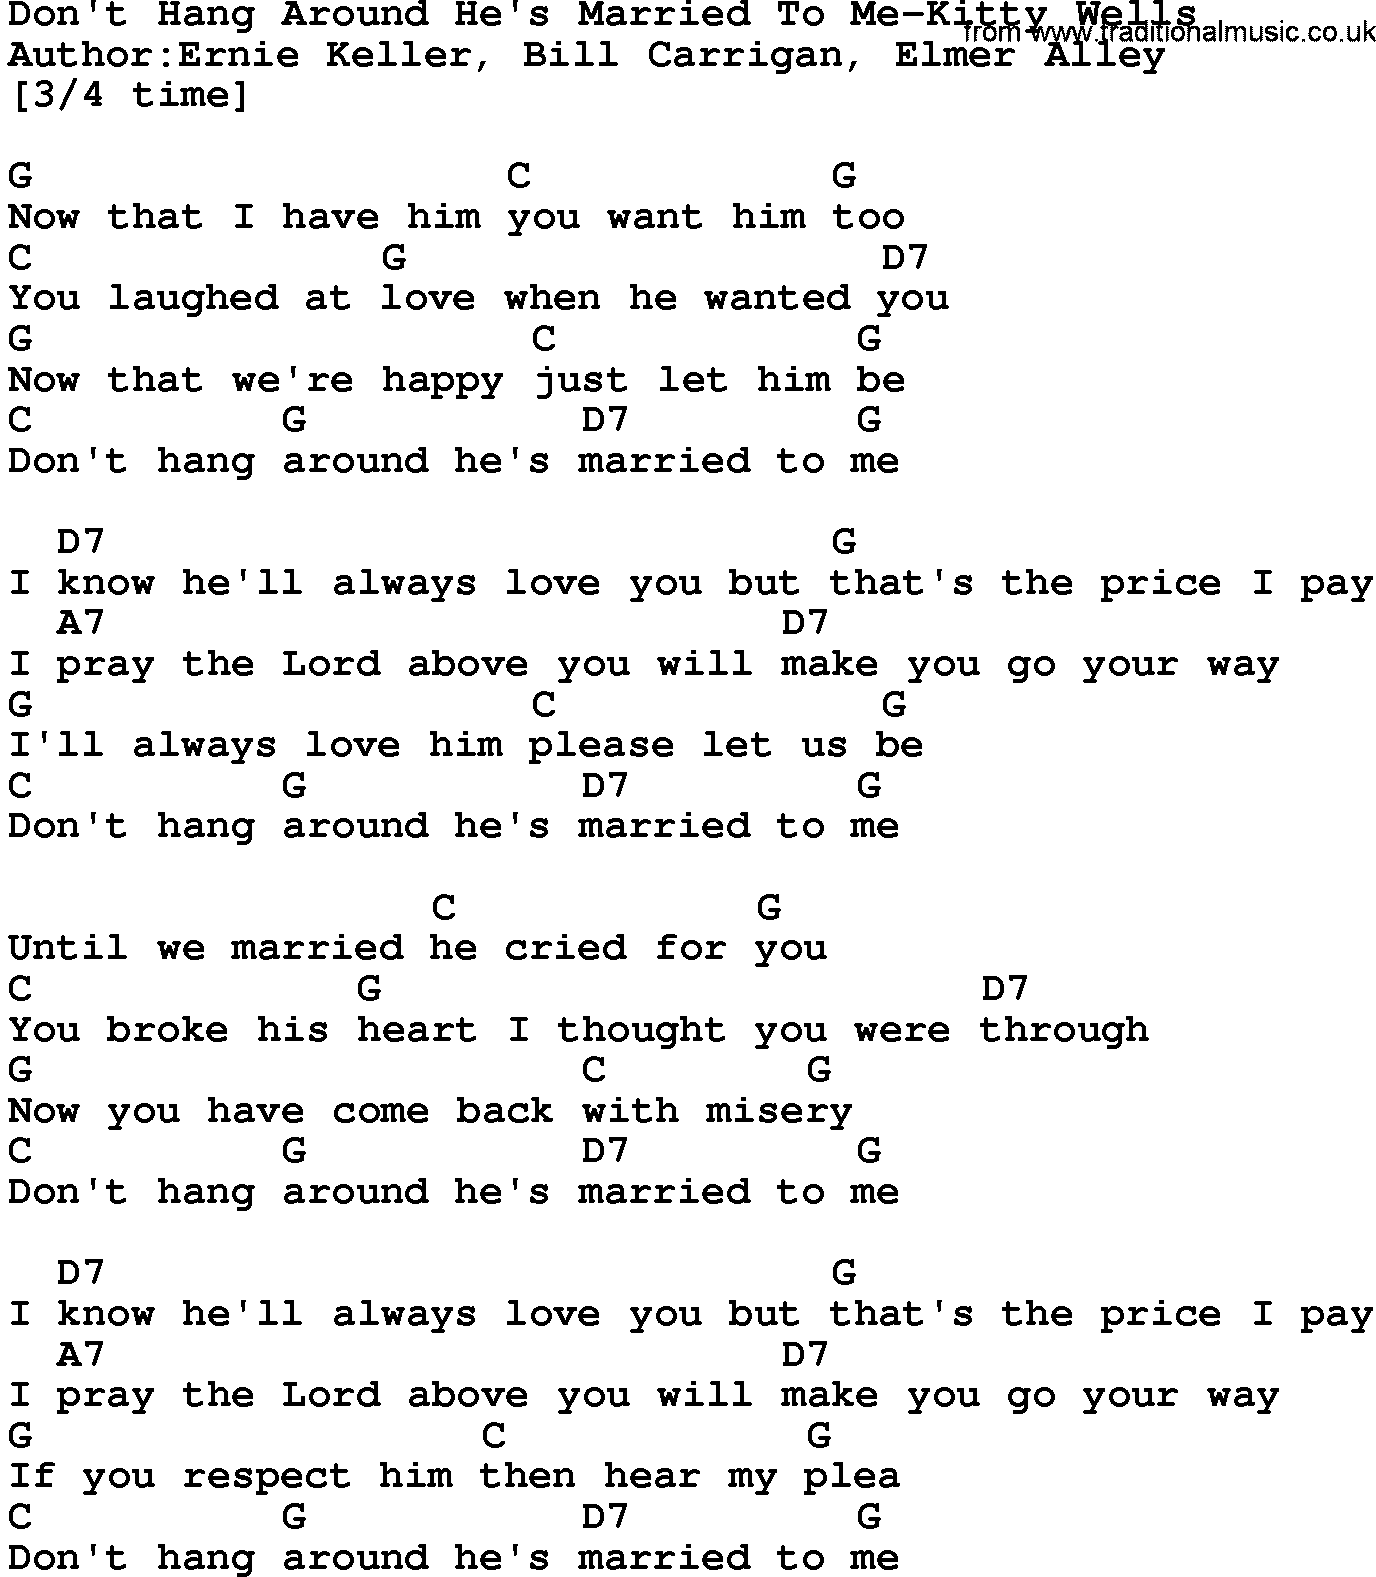 Country music song: Don't Hang Around He's Married To Me-Kitty Wells lyrics and chords